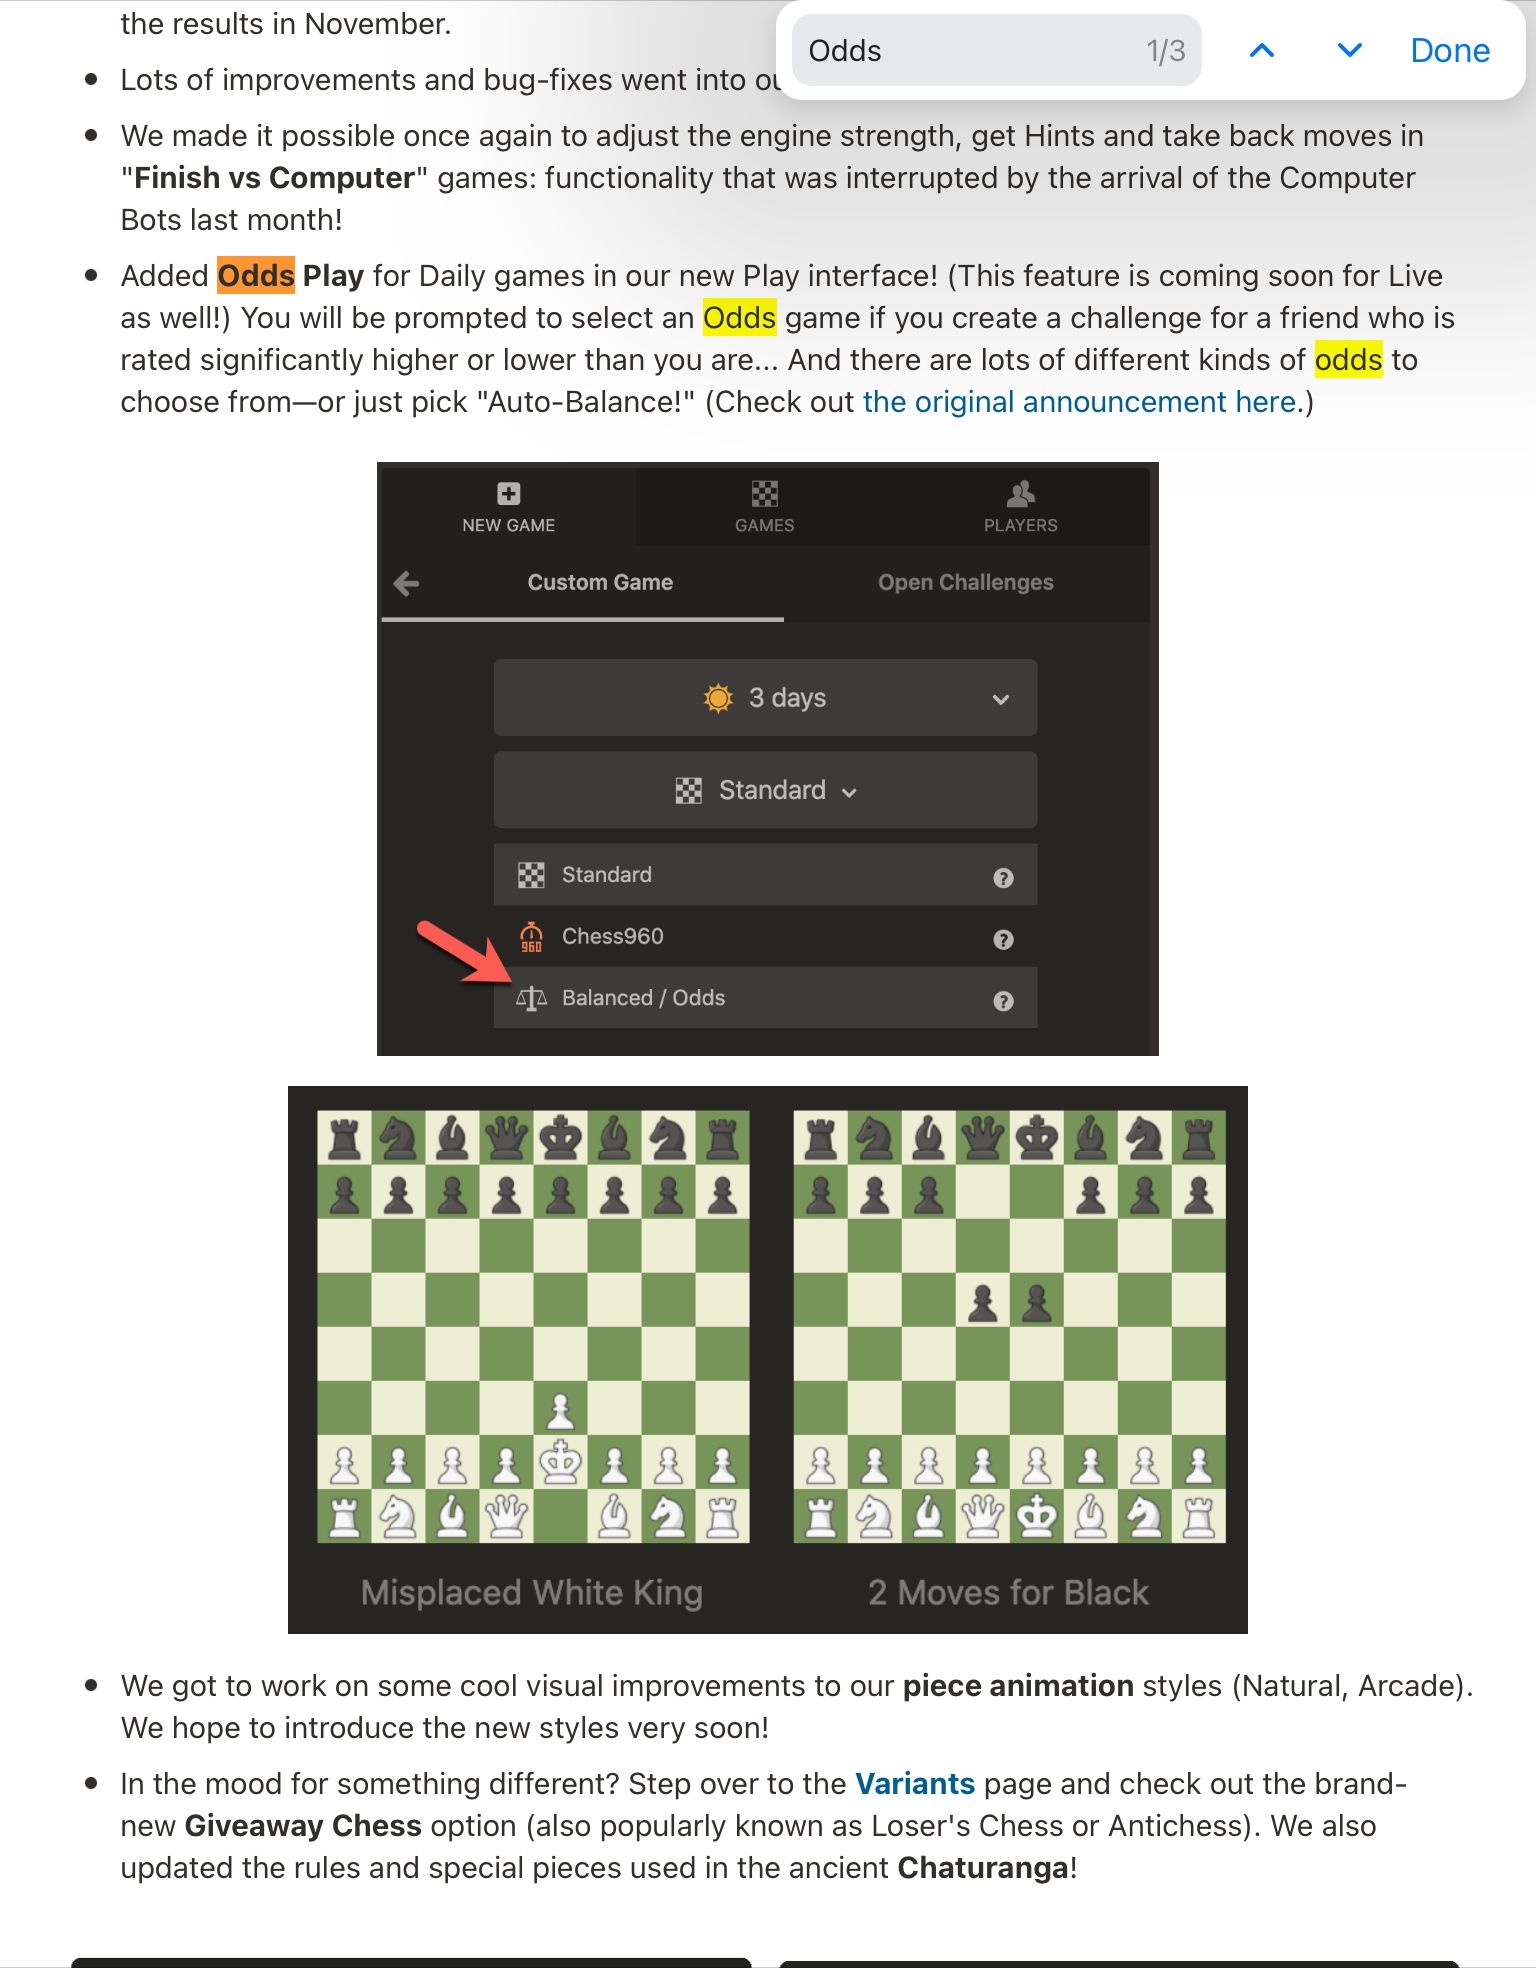 Can I use this site to play a game against myself? - Chess Forums - Chess .com